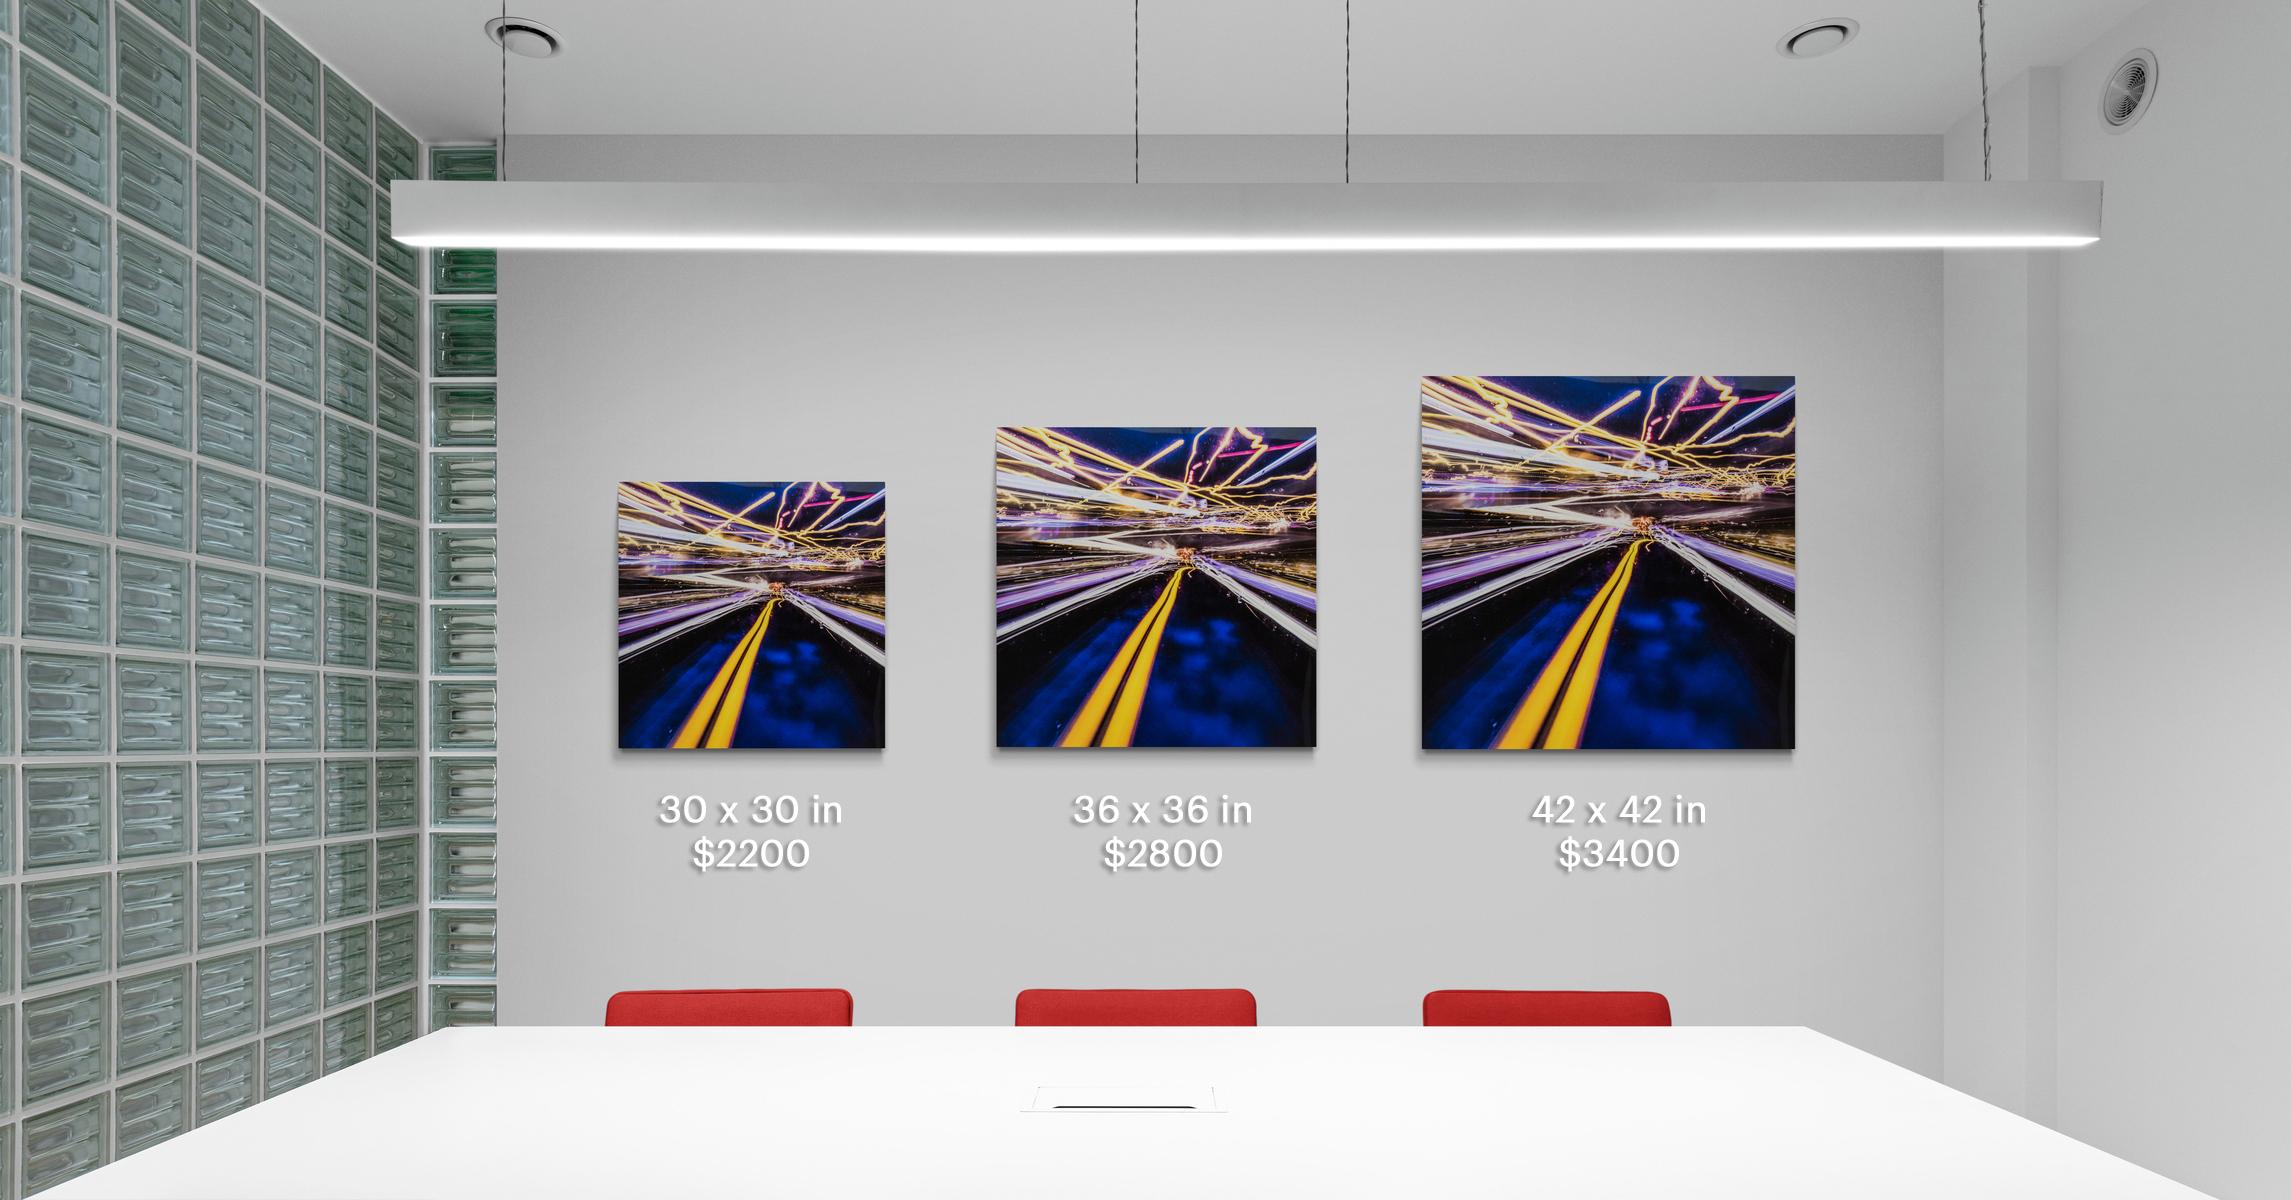 Shocks of light -- yellow , indigo, red and white -- zip through the night in this dynamic photographic print by Mark Bartkiw. This C-print is sealed between dibond and plexiglass. The work weighs 23 lbs. This work is the Artist's Proof from an